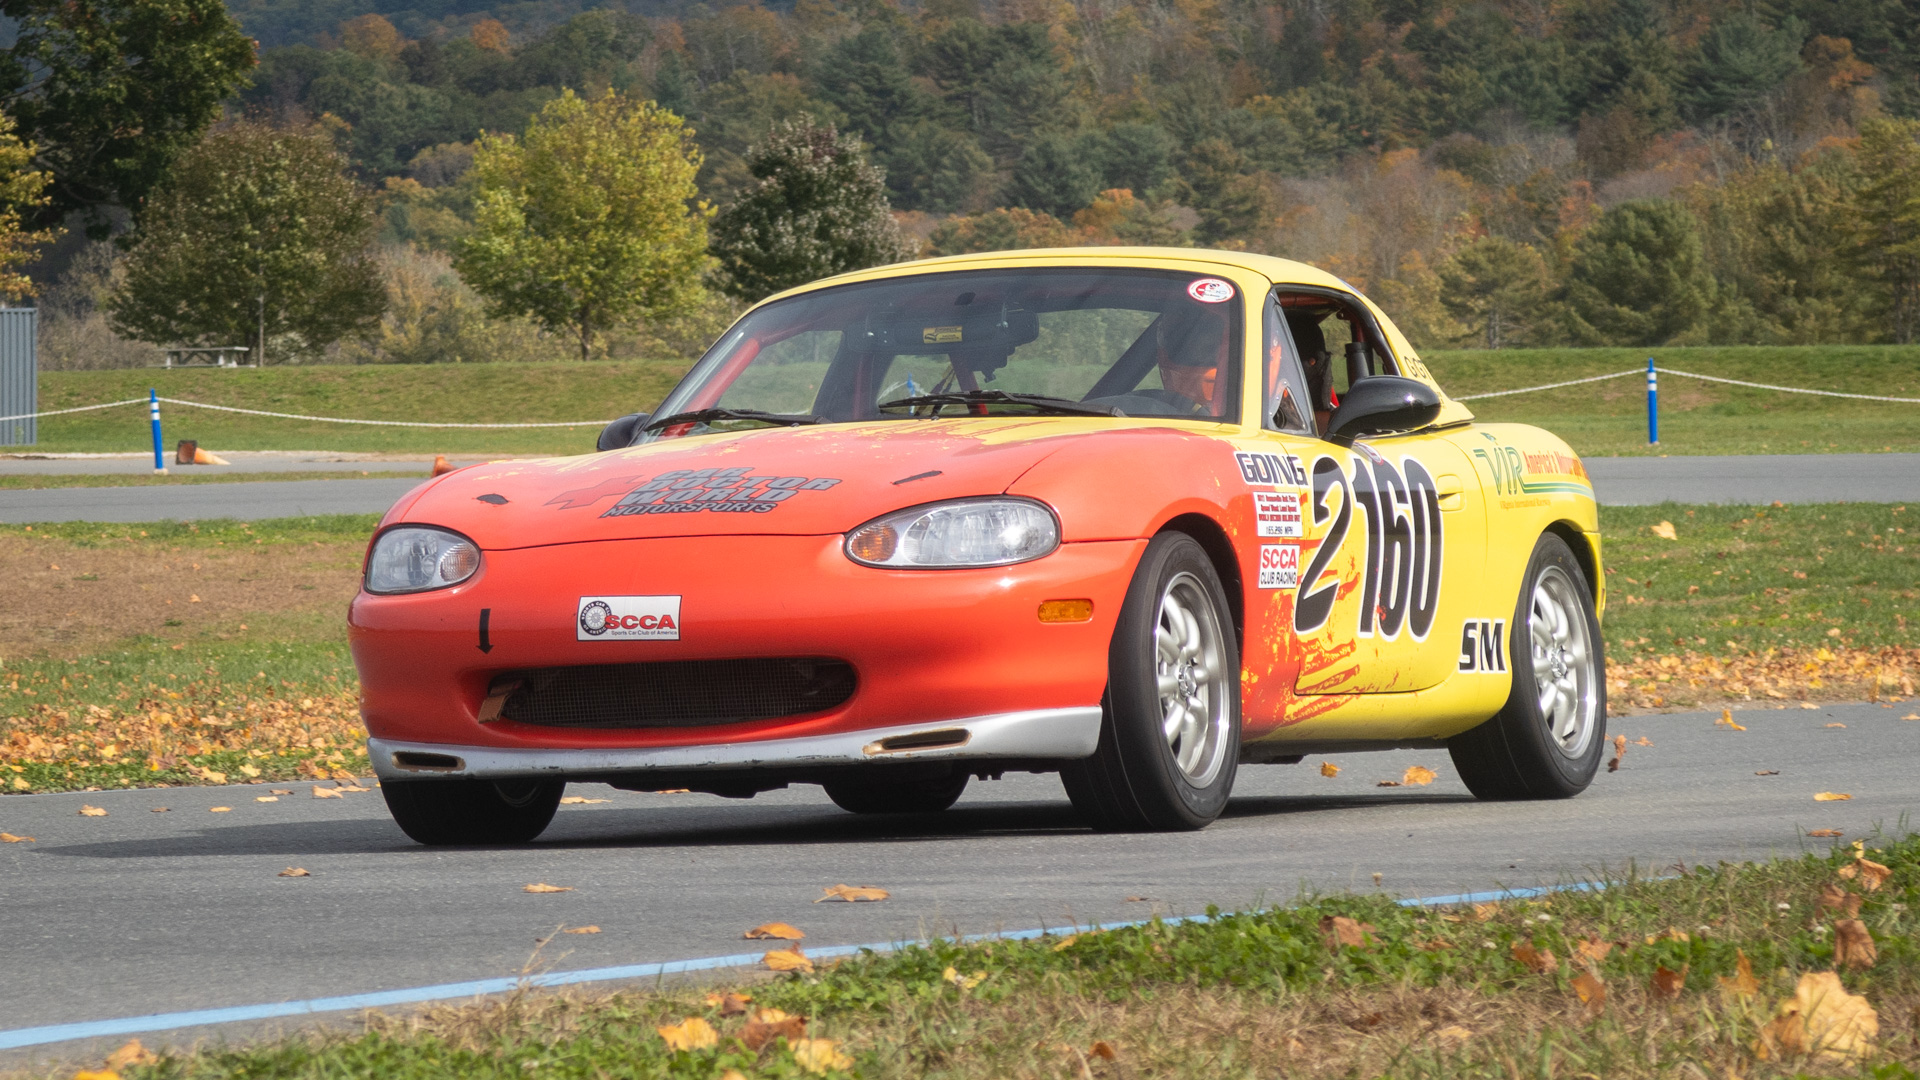 Buy This Spec Miata for Its Record-Setting Backstory—and for Charity